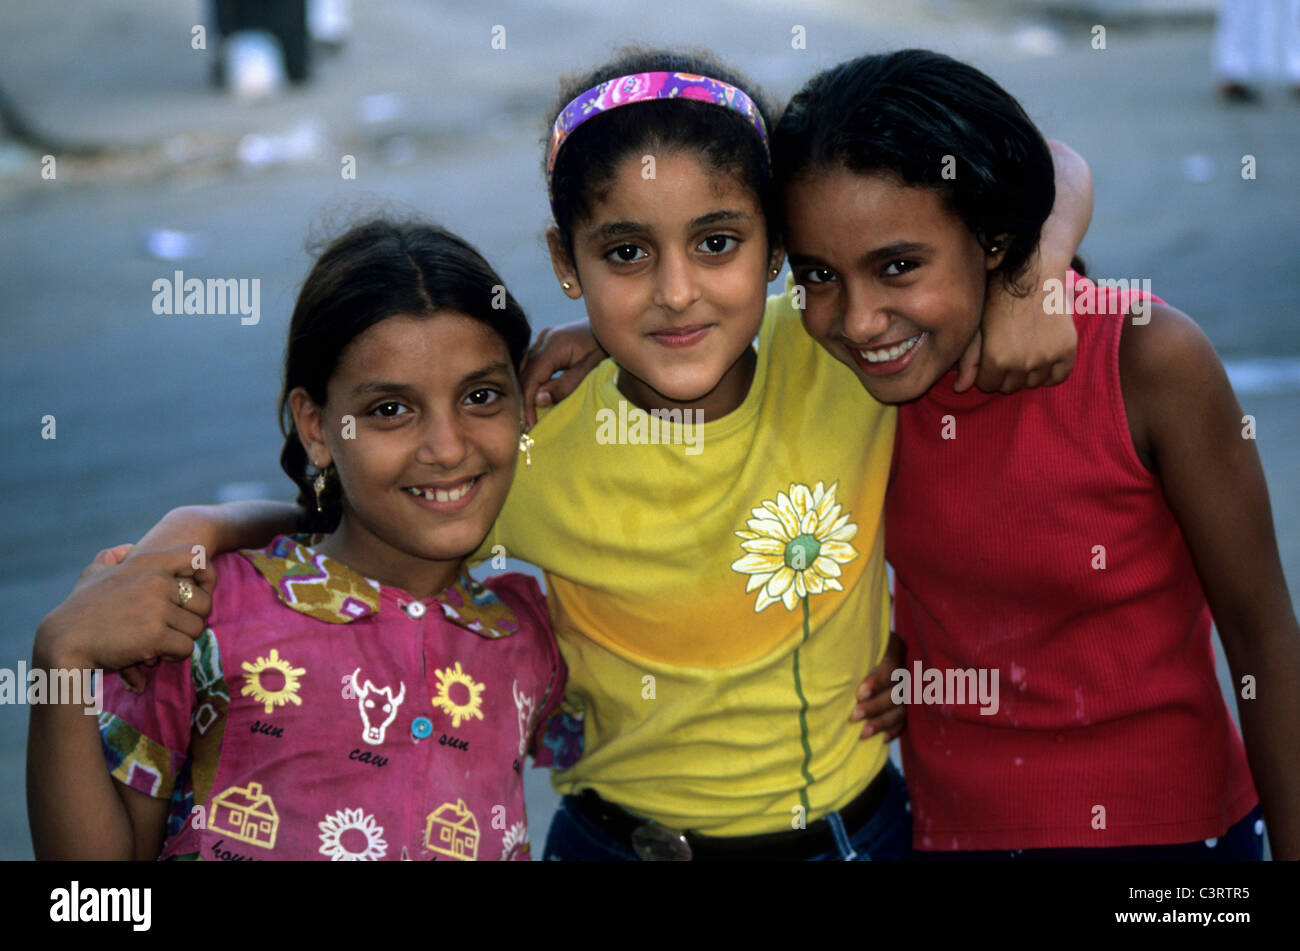 Three young Egyptian girls Stock Photo